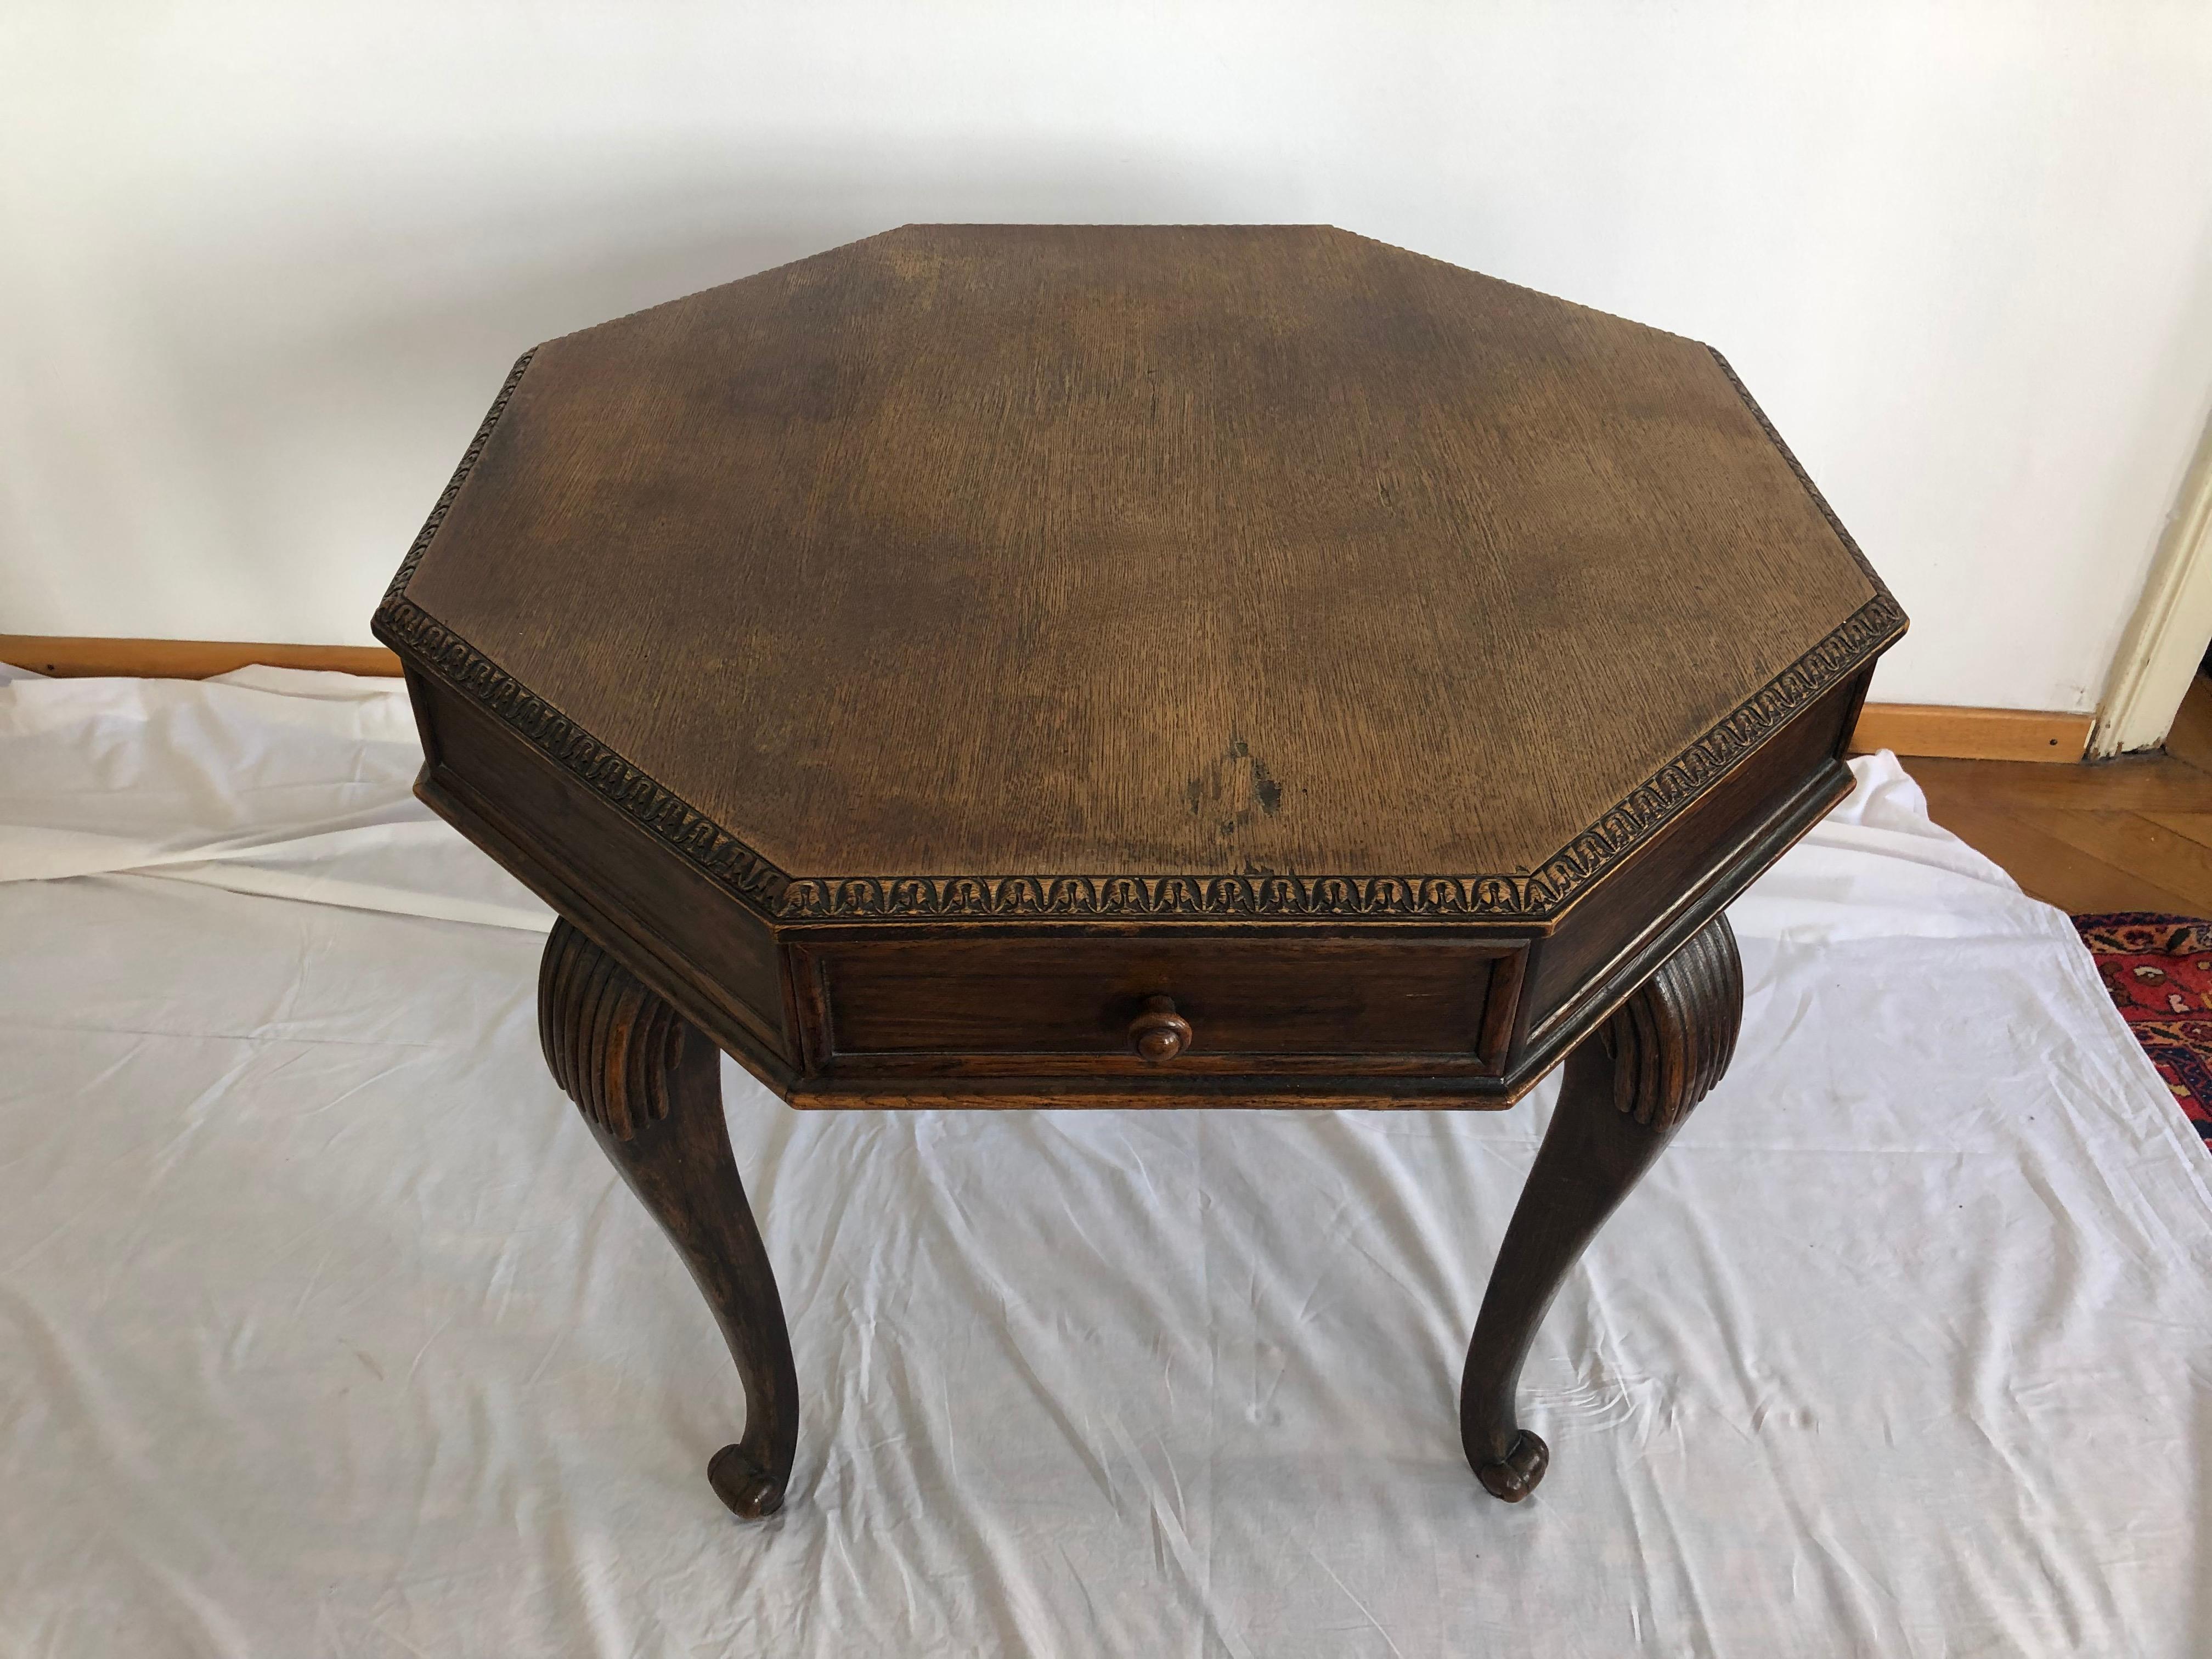 Chippendale style walnut construction with walnut veneer, made in Austria, circa 1880.